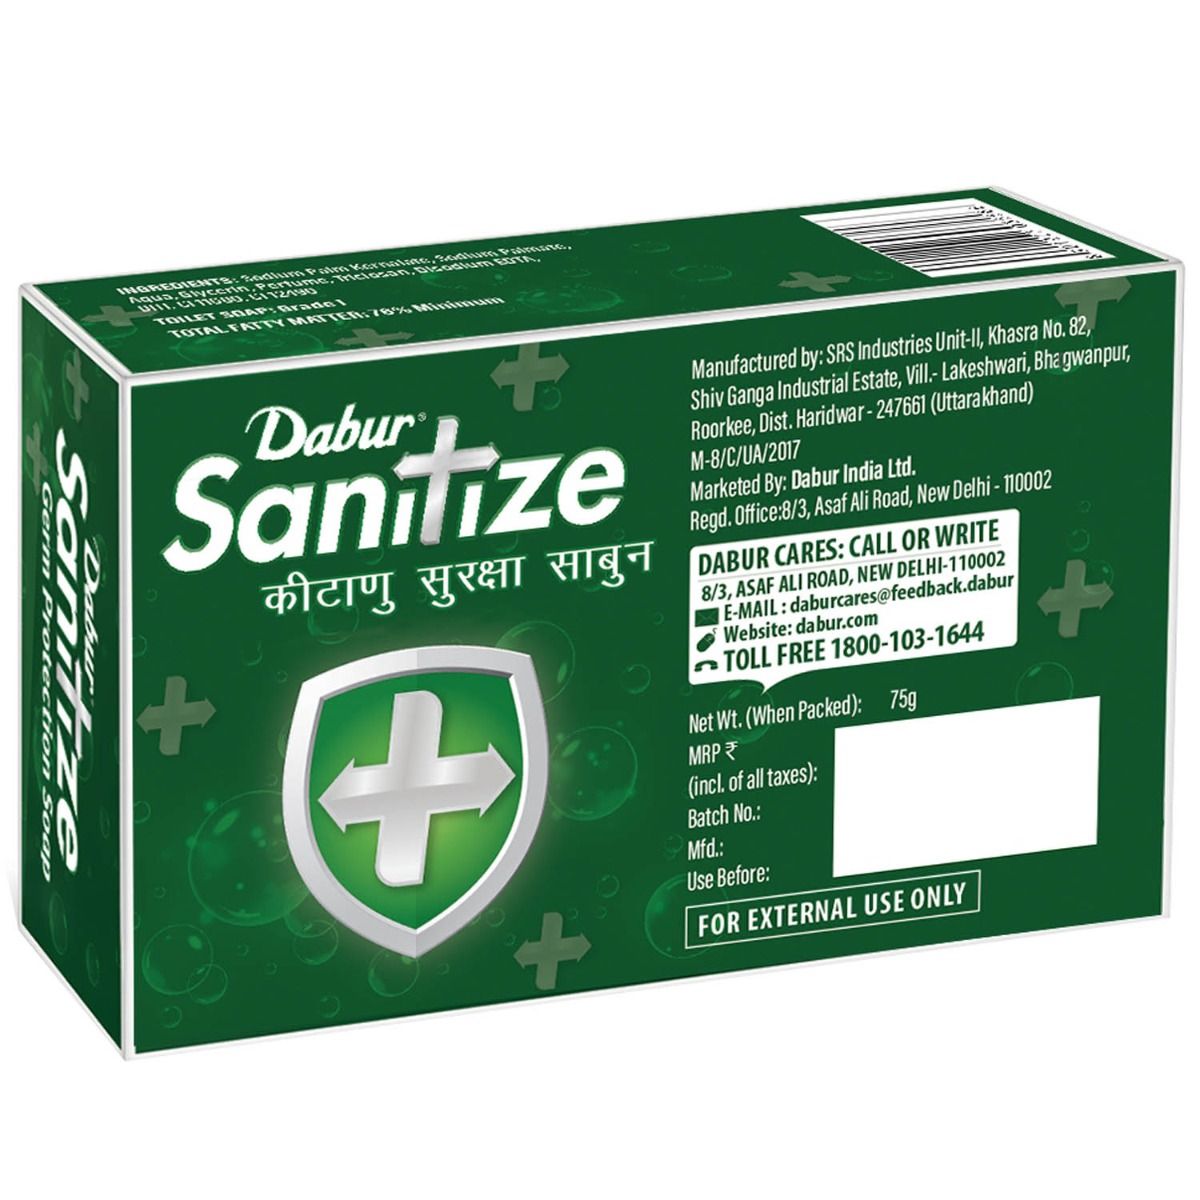 Dabur Sanitize Germ Protection Soap, 75 gm, Pack of 1 